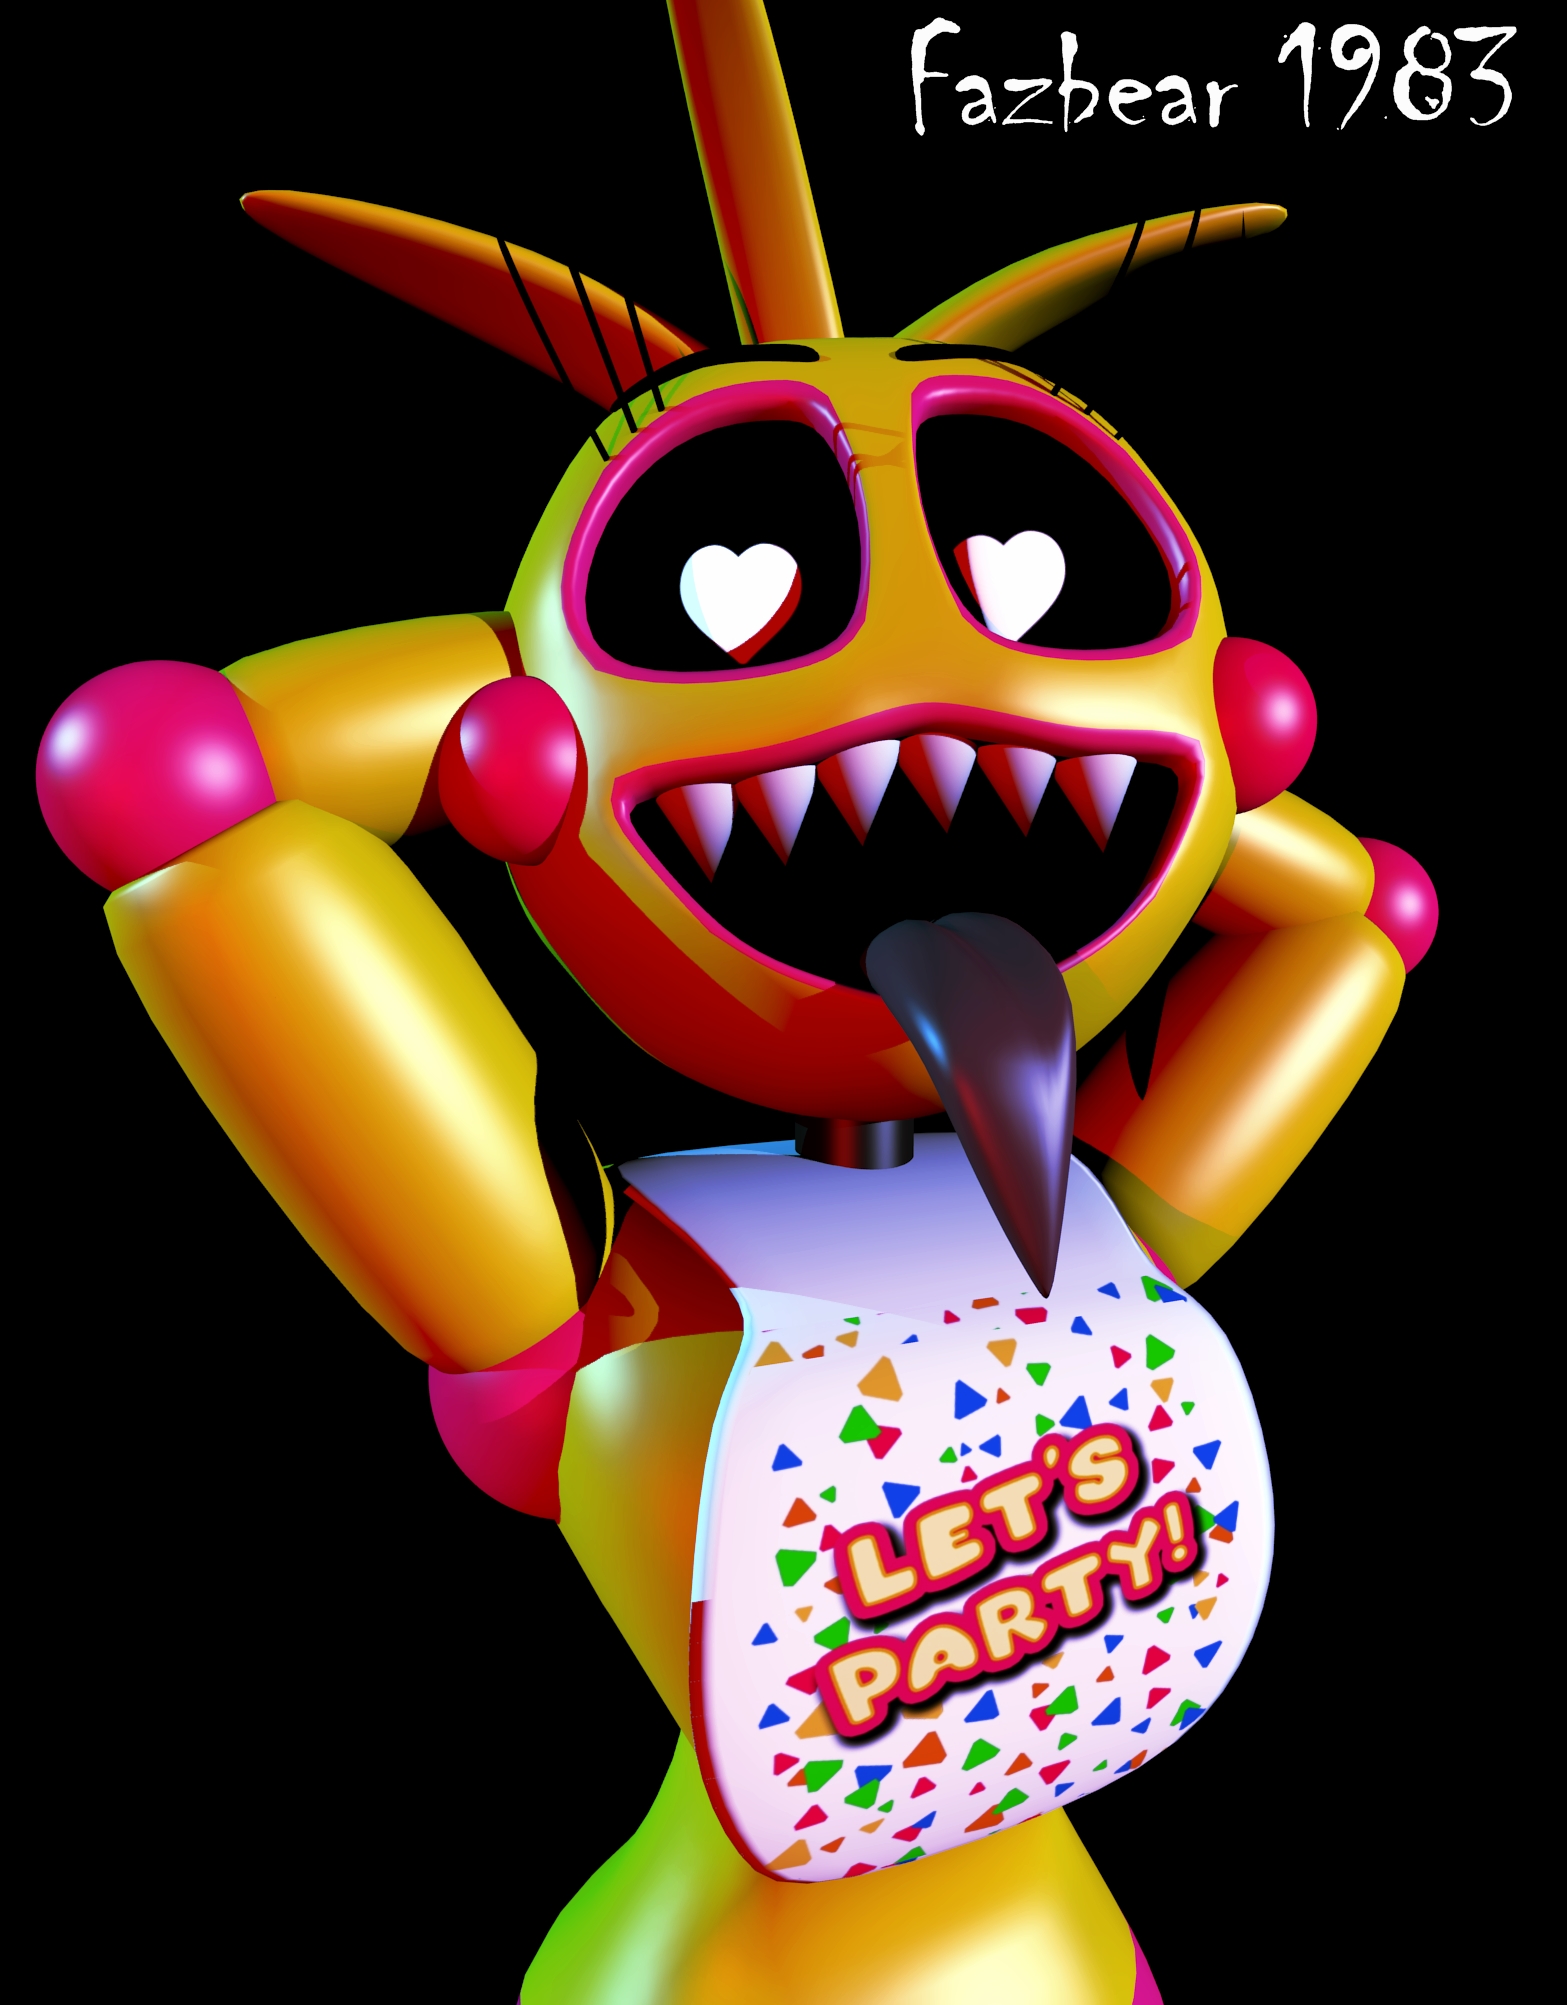 Download Modelucn Funtime Chica - Funtime Chica Ucn Model PNG